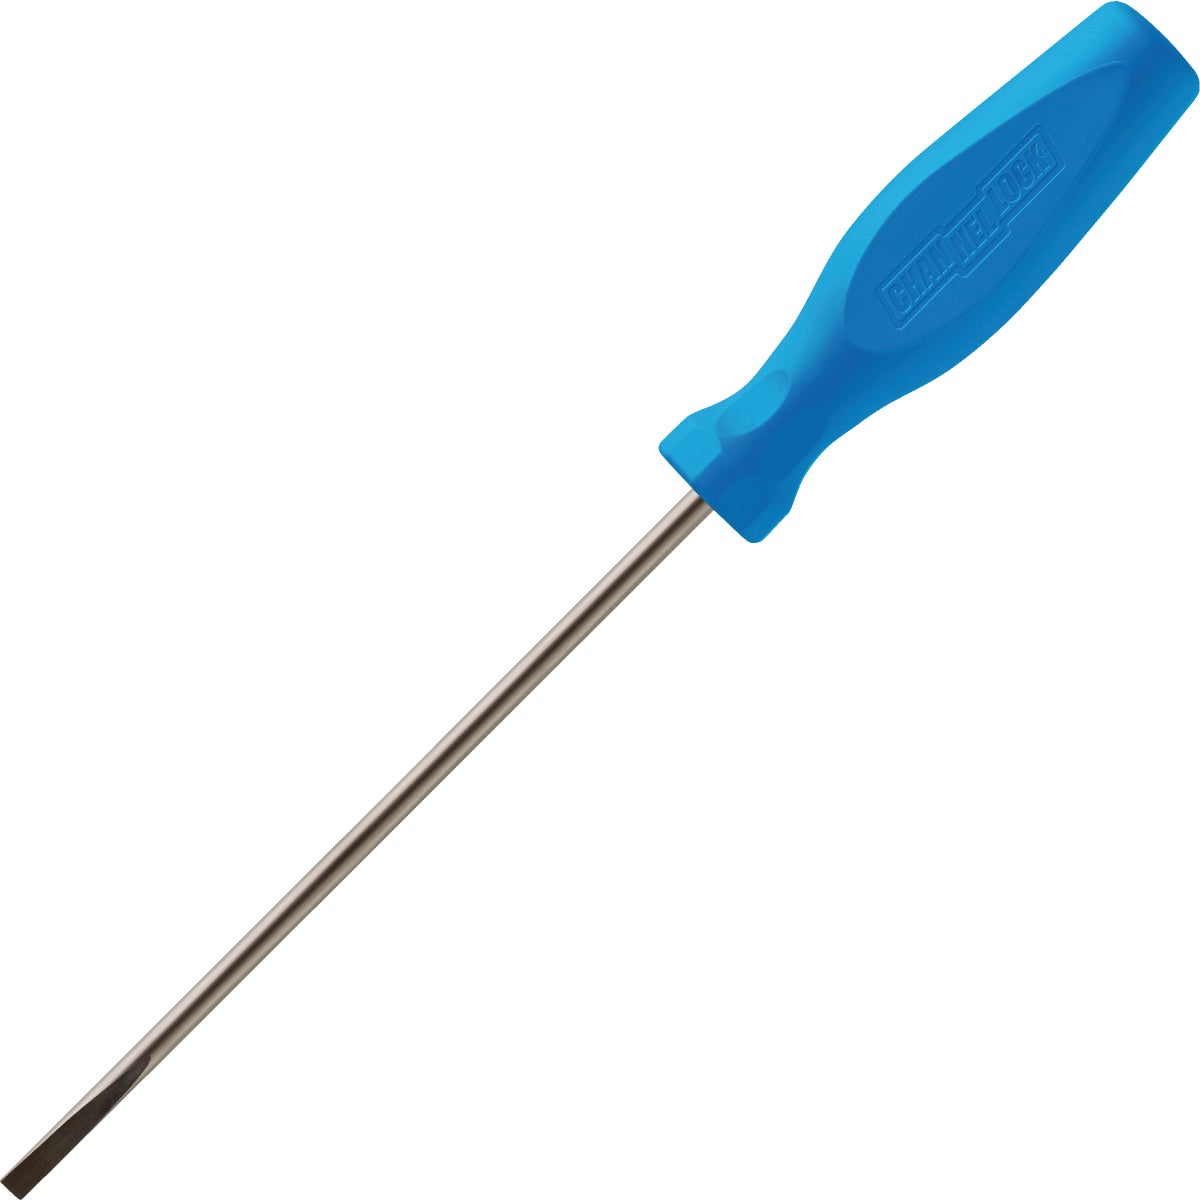 Channellock 3/16 In. x 6 In. Professional Slotted Screwdriver